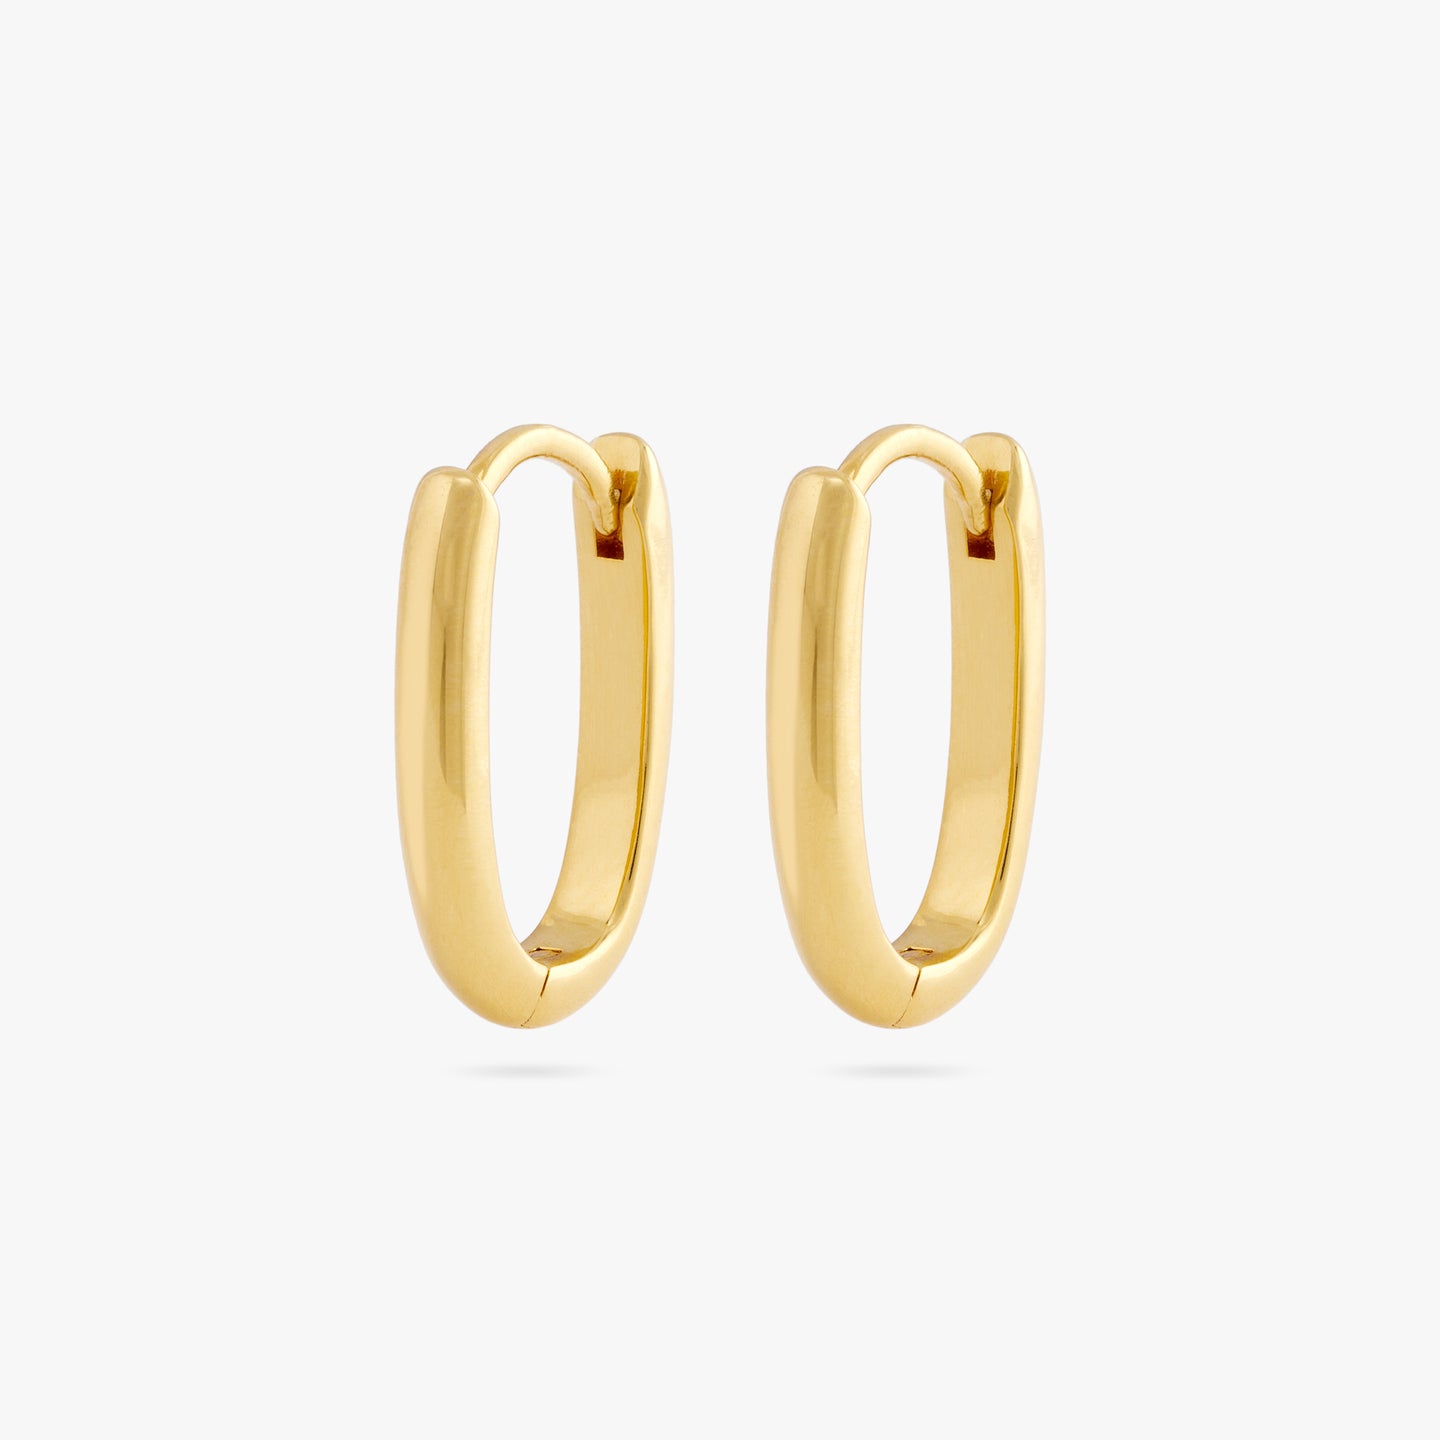 A pair of medium sized gold hoops in the shape of an oval. [pair] color:null|gold